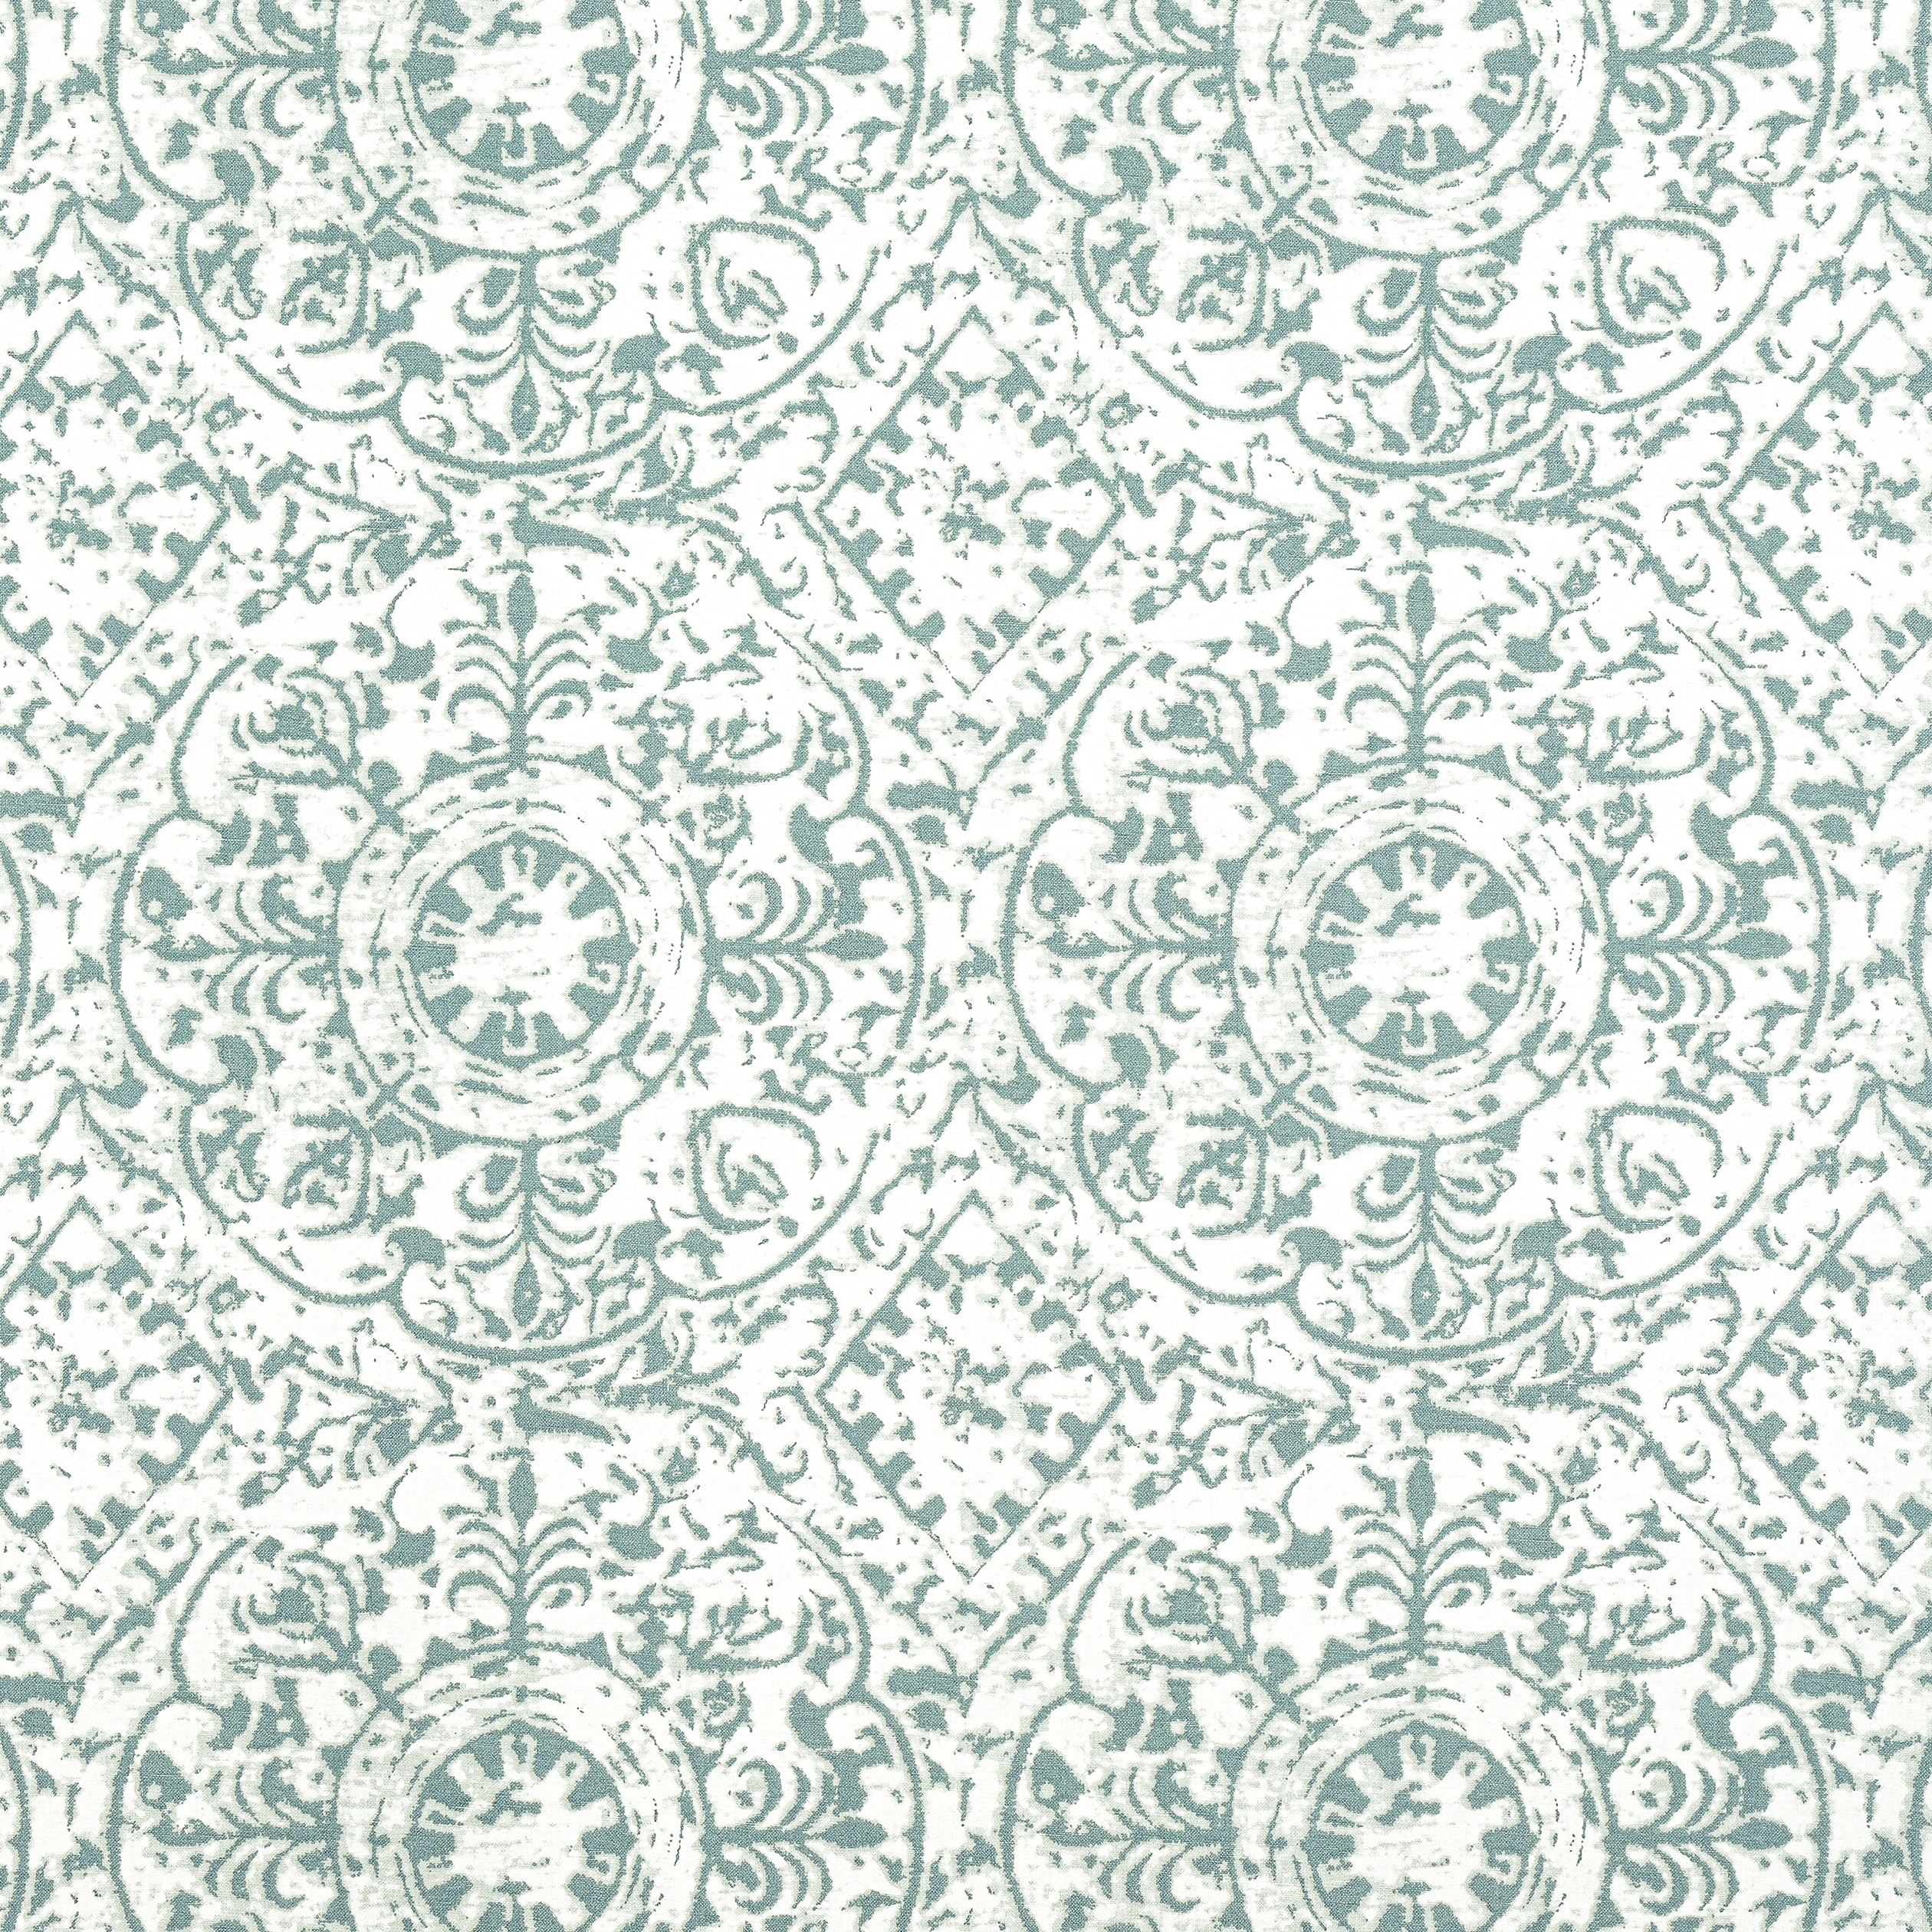 Havana fabric in seaglass color - pattern number F981310 - by Thibaut in the Montecito collection